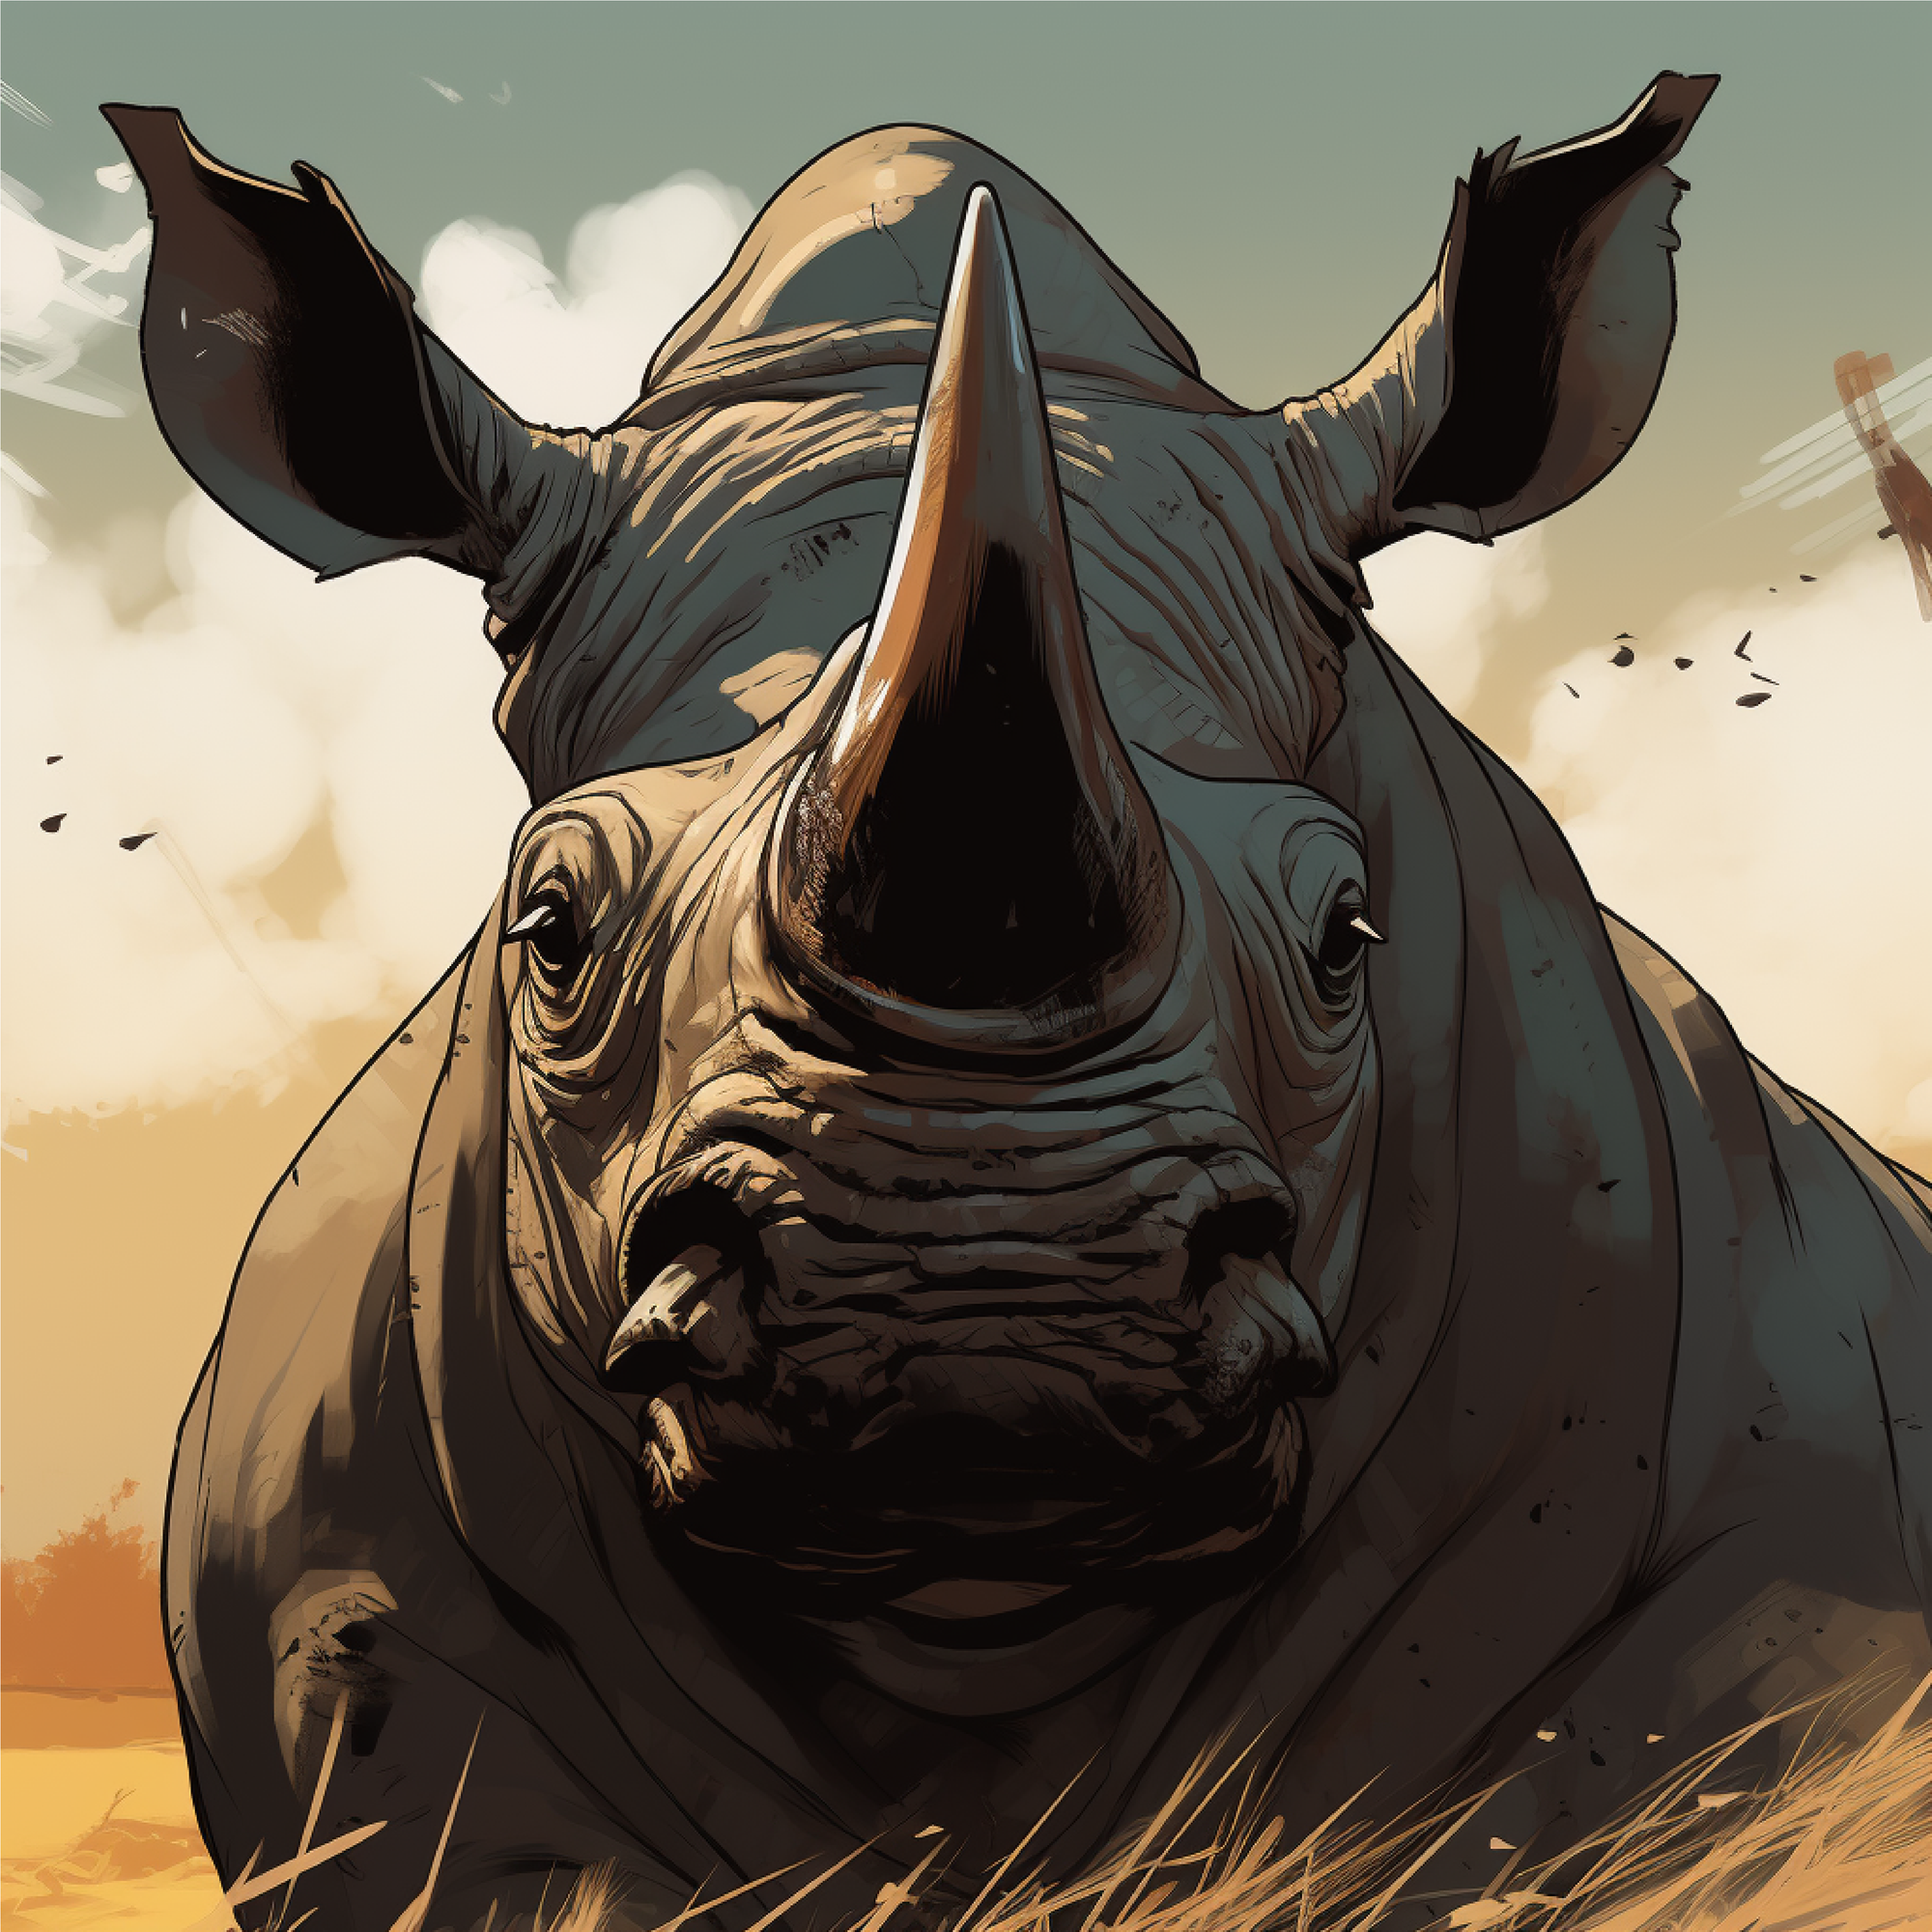 The Tale of the Black Rhino: A Battle Against Poaching